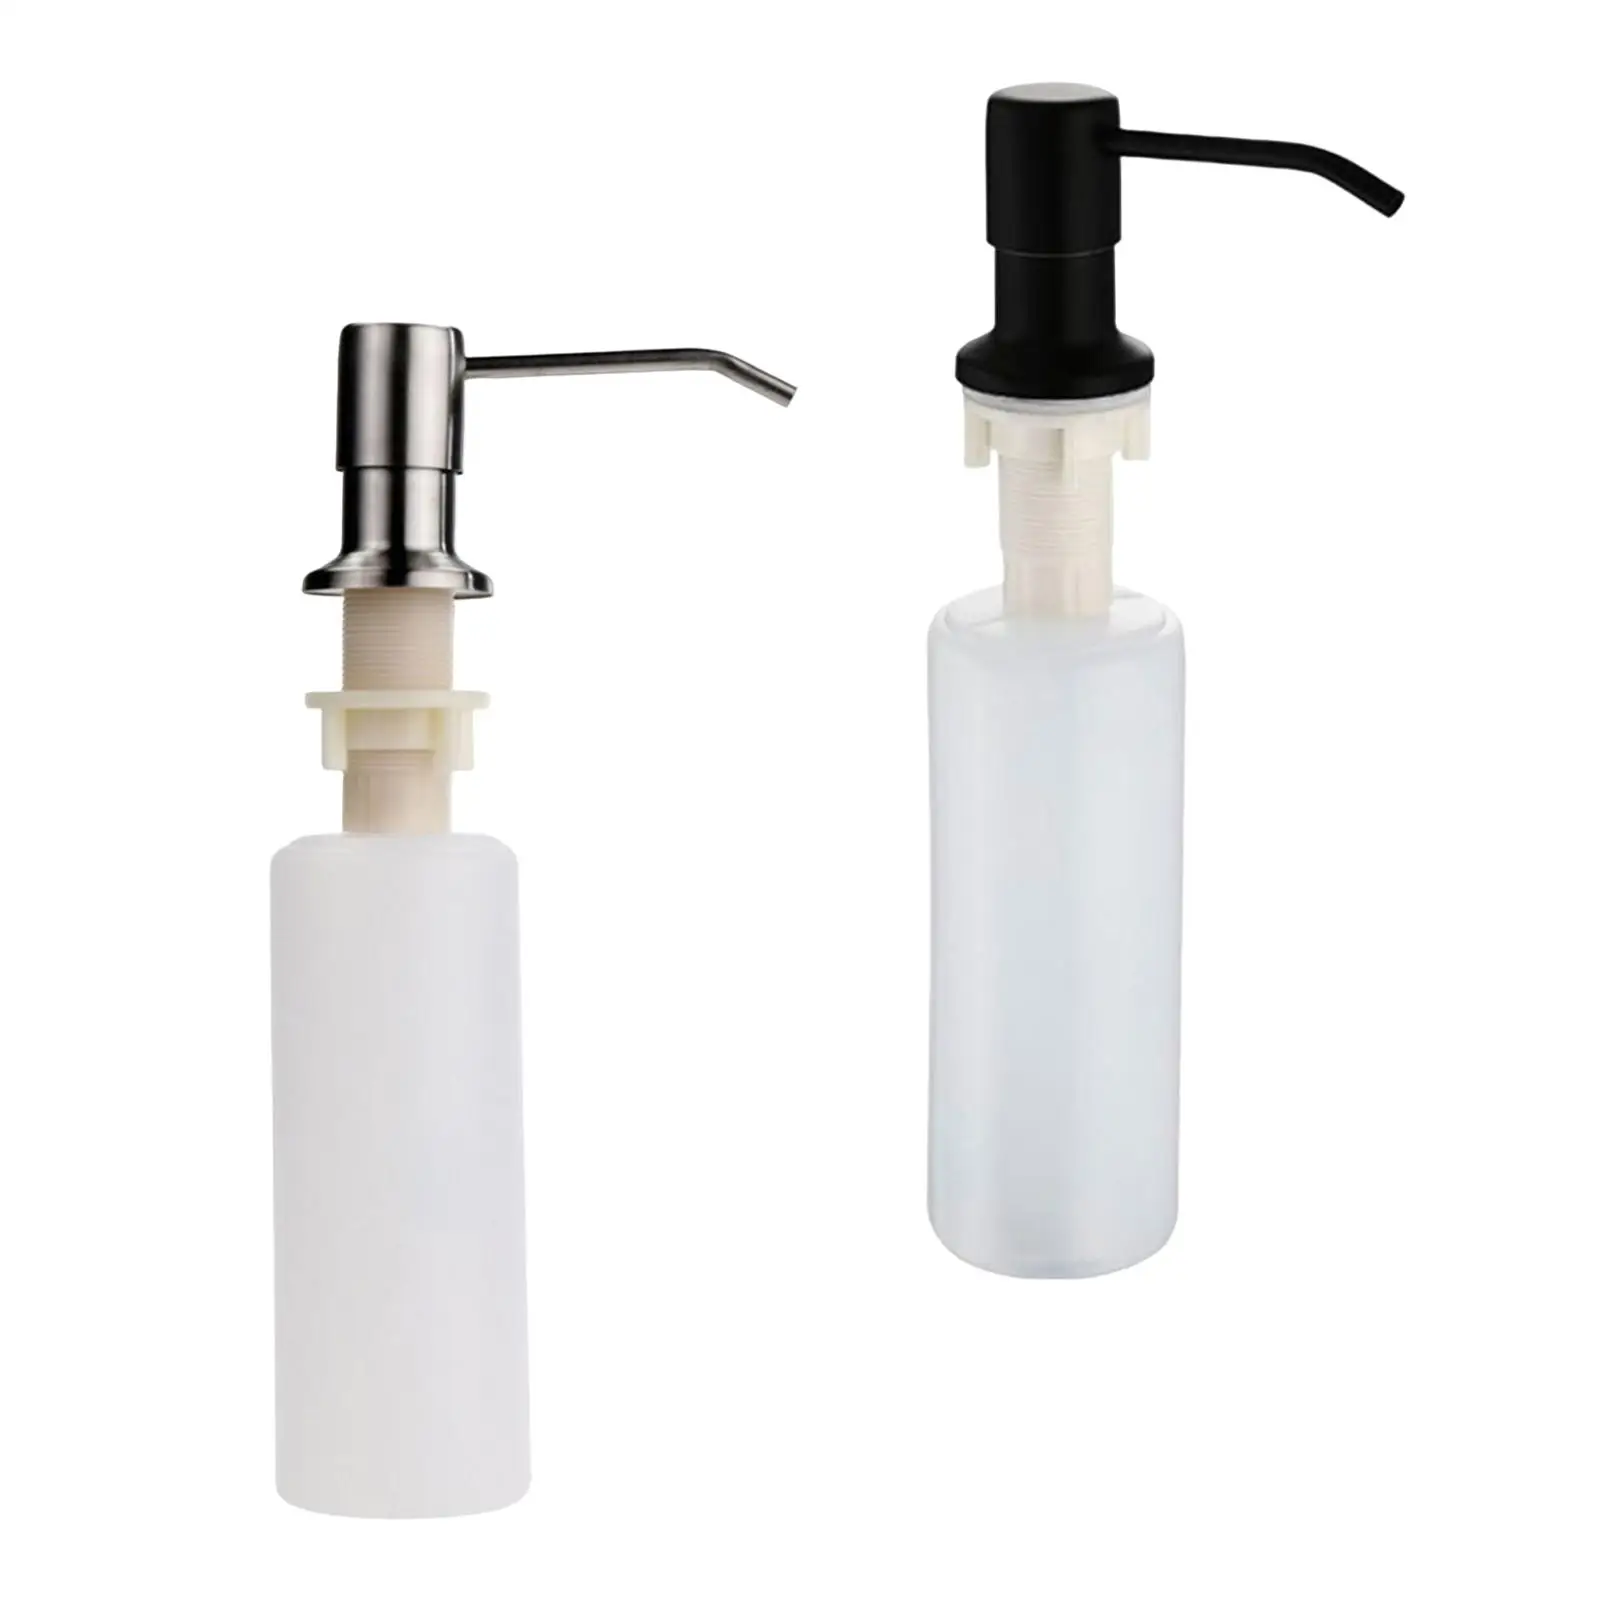 300ml Liquid Soap Dispenser Universal Lotion Bottle Pump Stainless Steel for Sink Opening 25mm~36mm Bathroom Hotel Supply Office